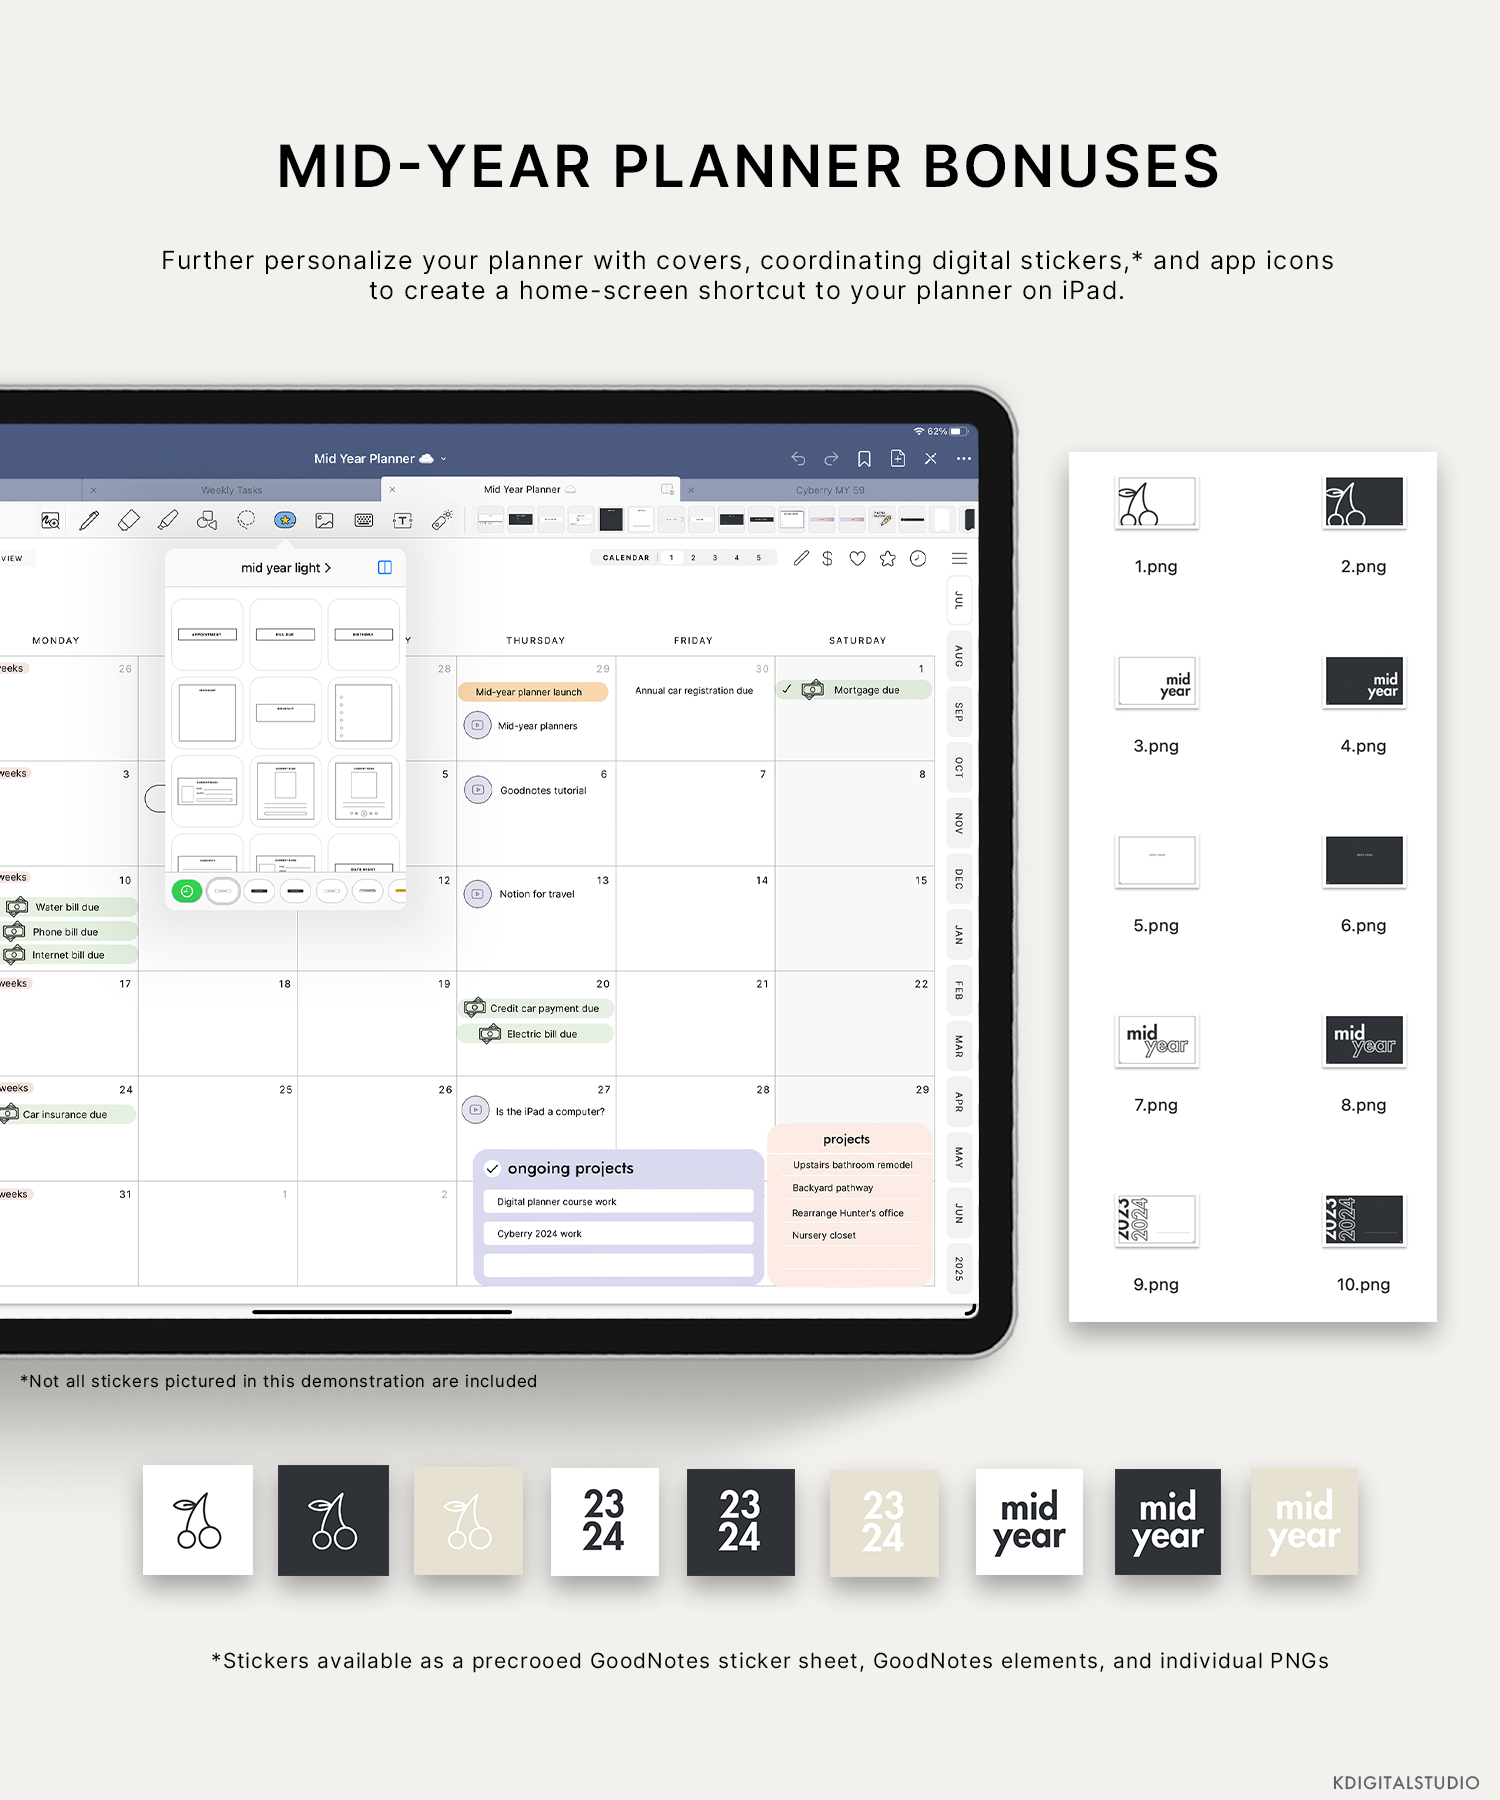 Further personalize your planner with covers, coordinating digital stickers, and app icons to create a home-screen shortcut to your planner on iPad.